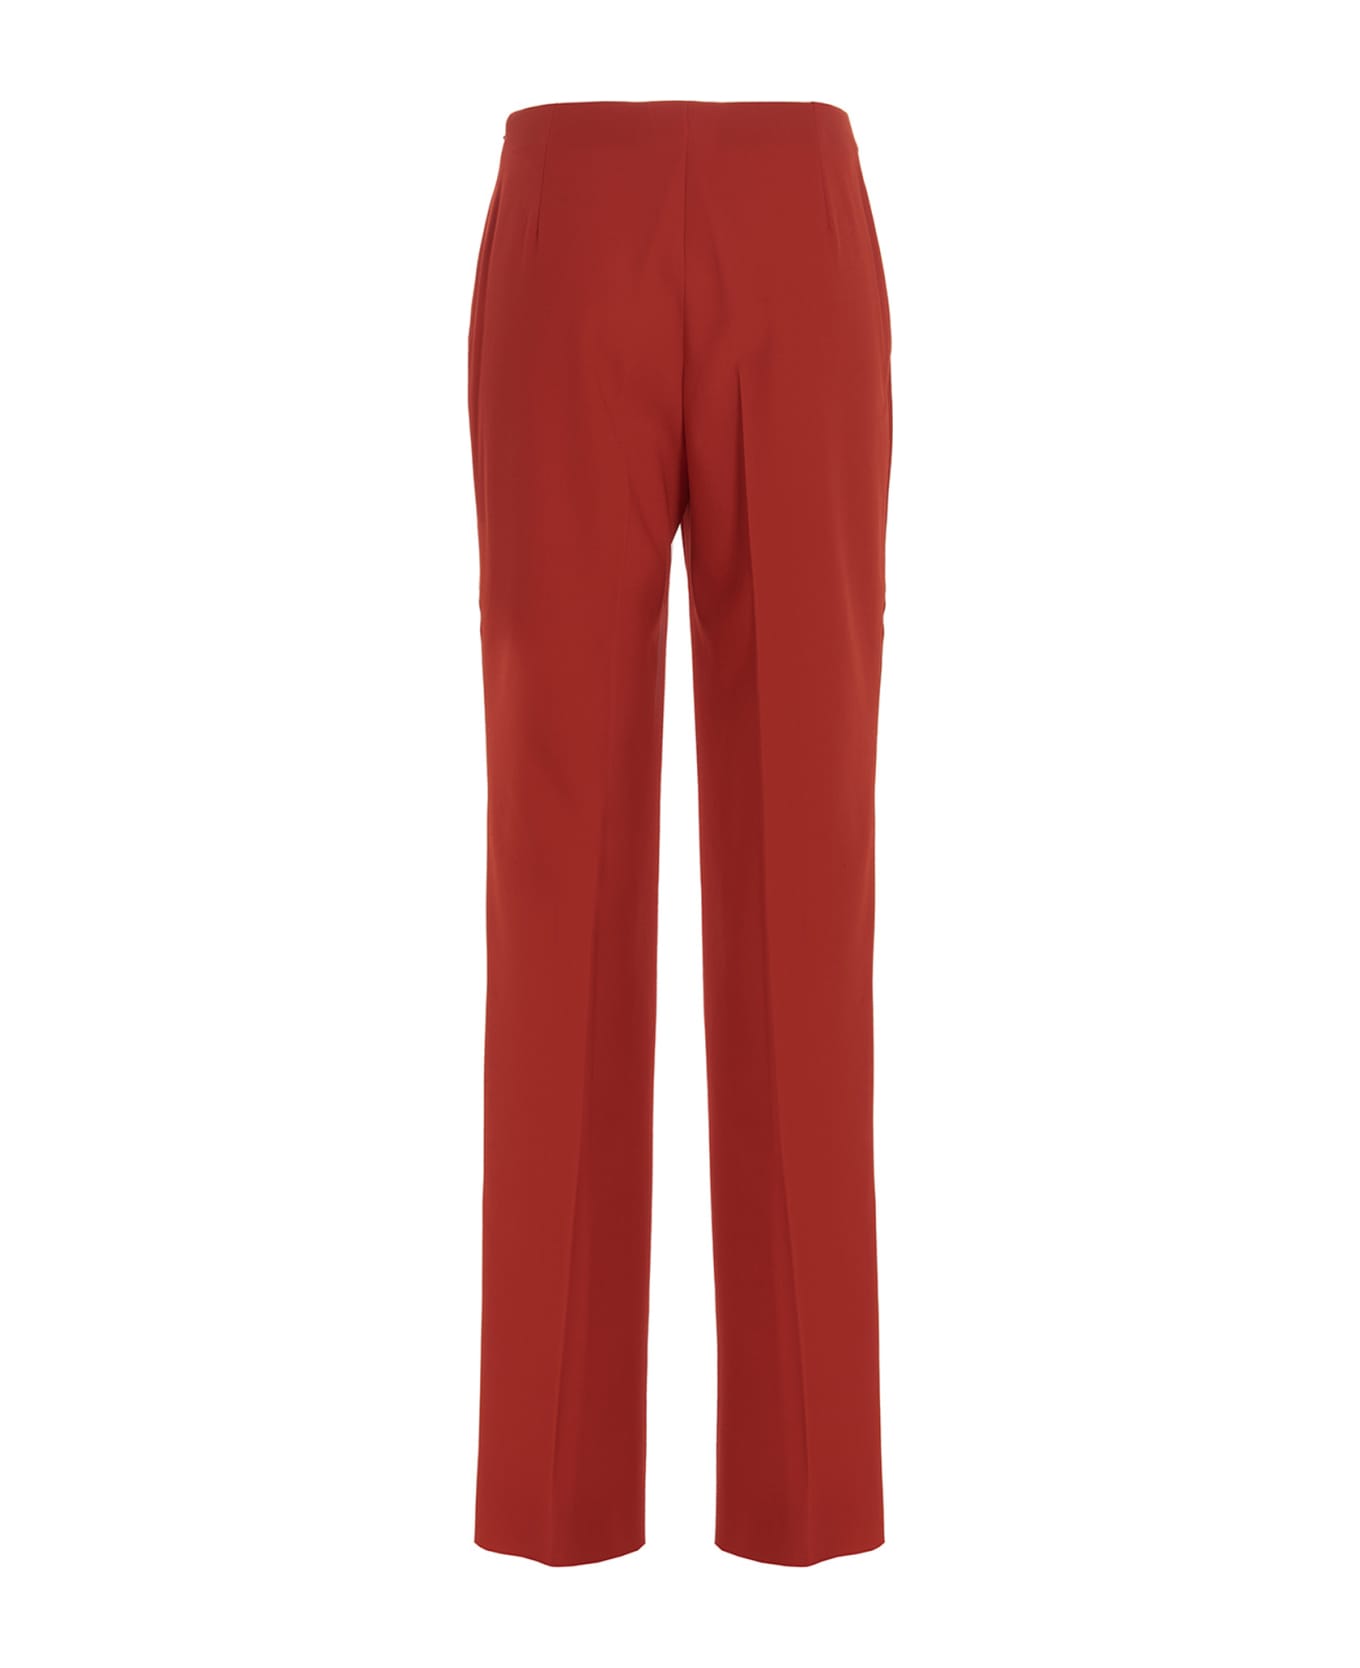 Ferragamo Straight Pants With Pleat - Red ボトムス